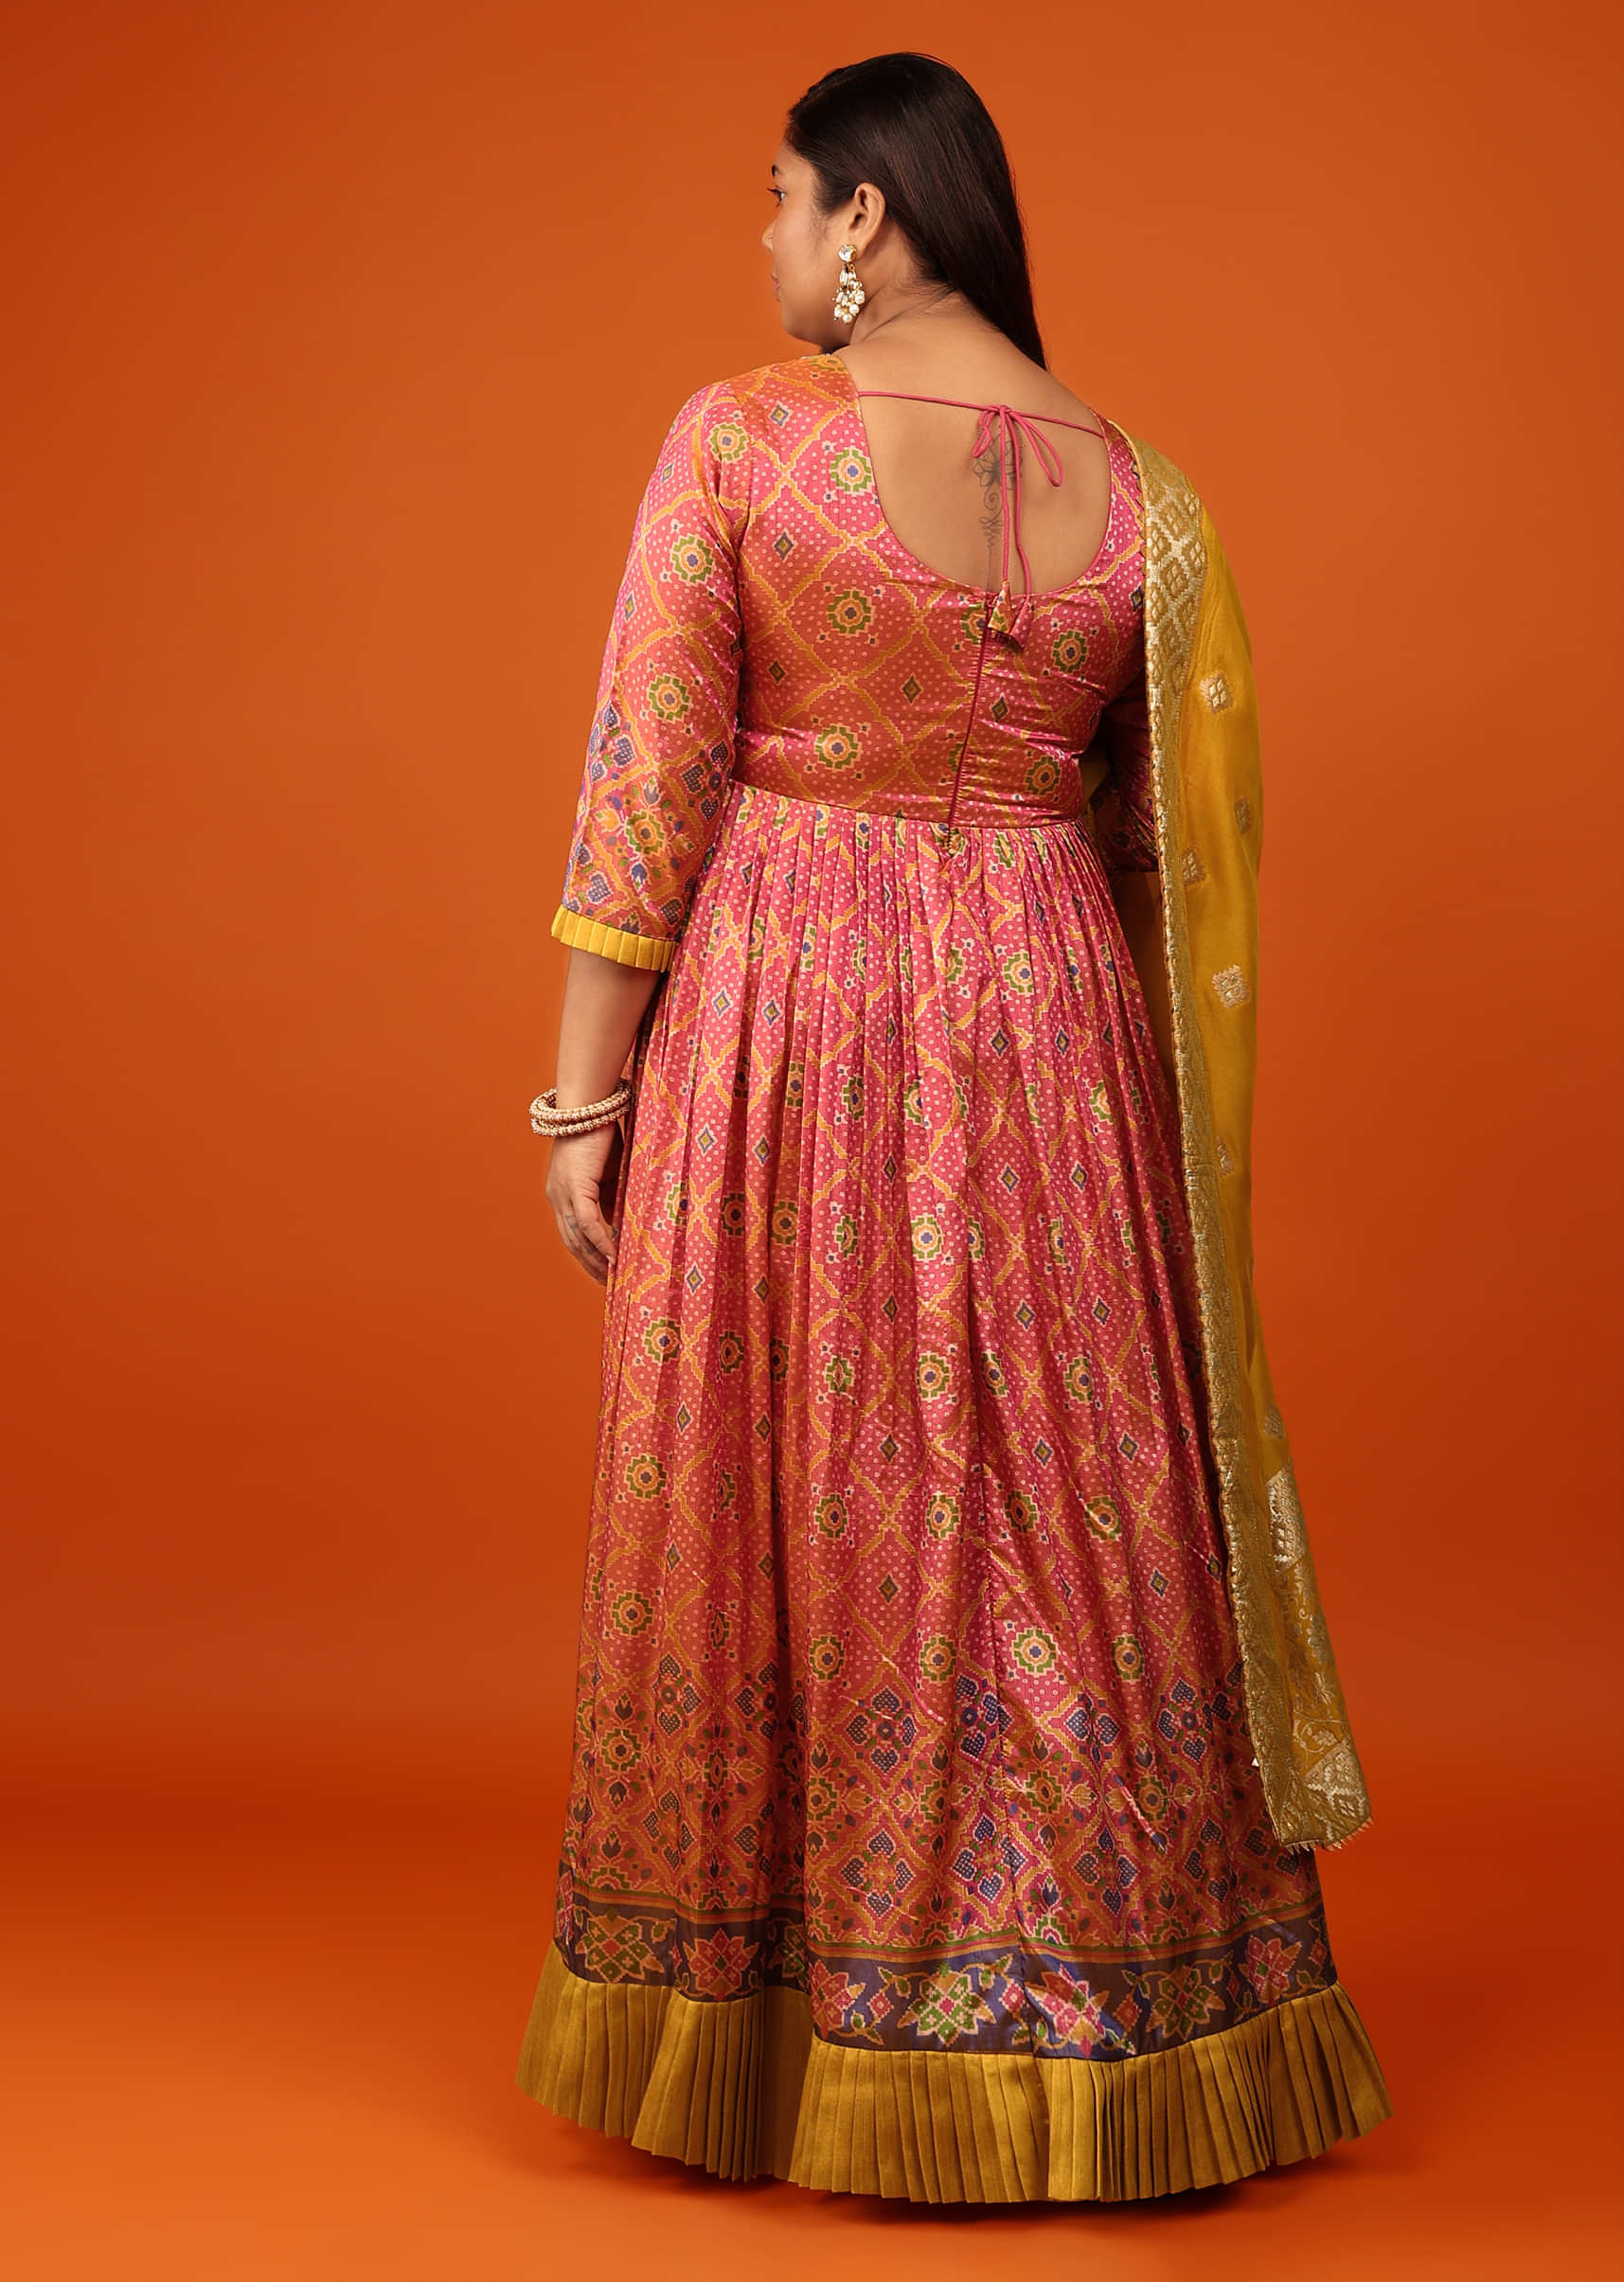 Rouge Pink Anarkali Suit In Silk With Bandhani And Patola Print And Contrast Mustard Frill